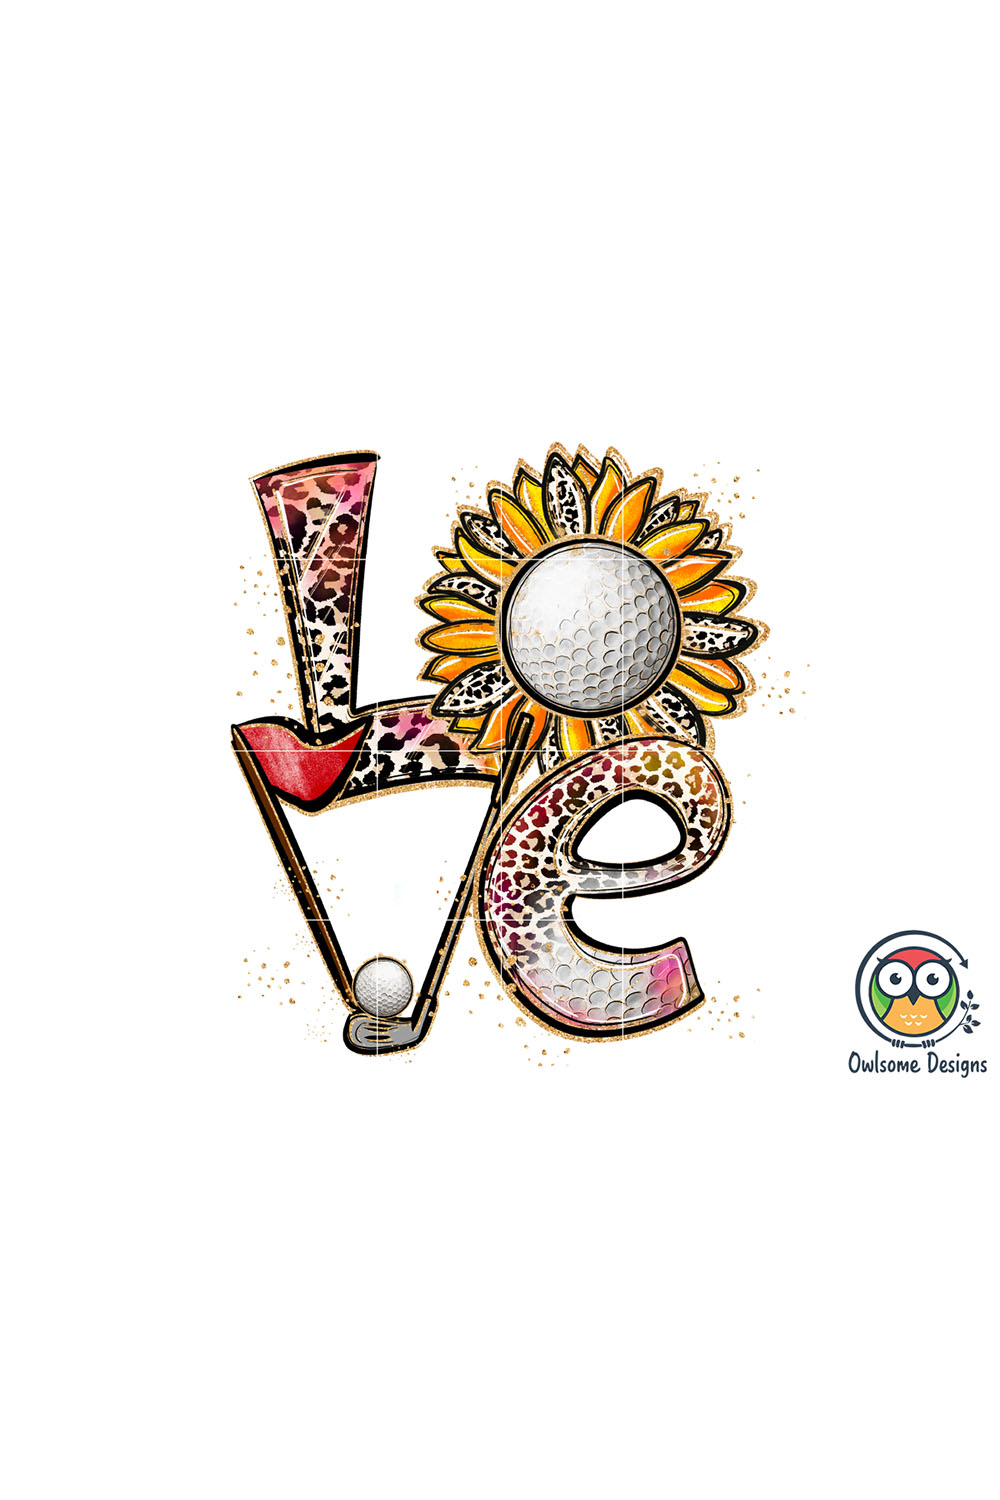 Image with exquisite inscription love with elements of golf.